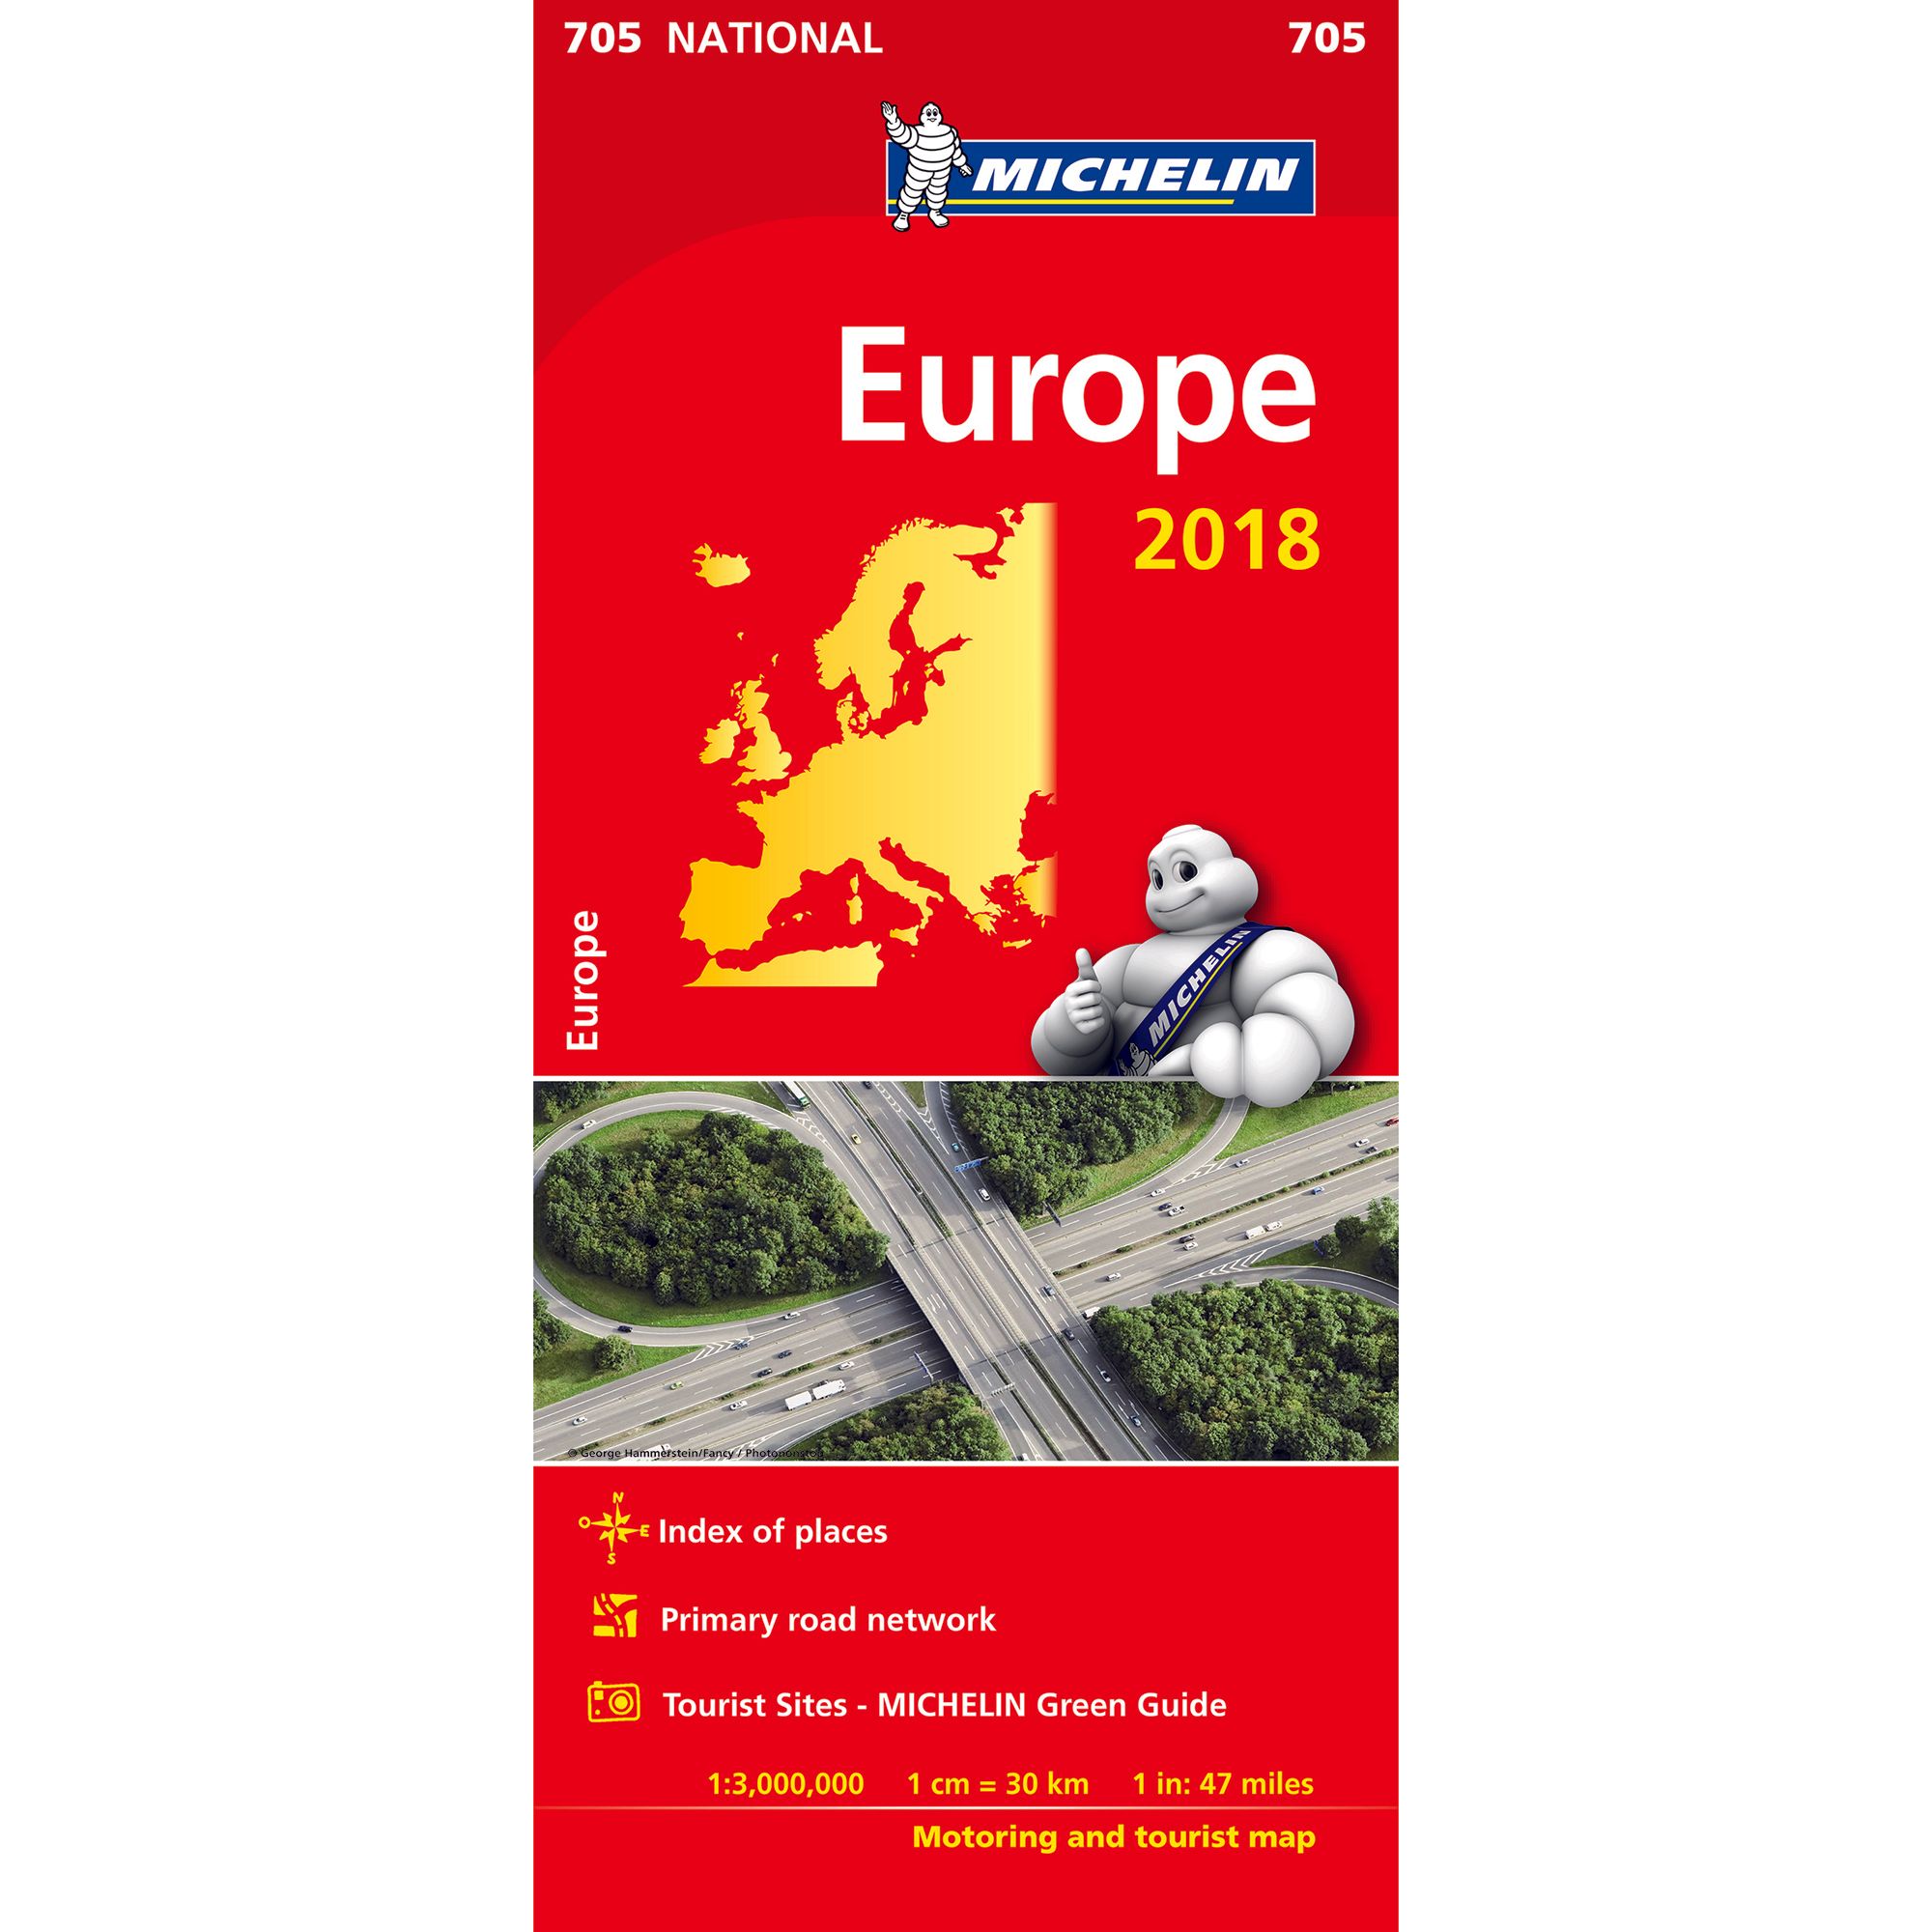 Europe 2018 National Map 705